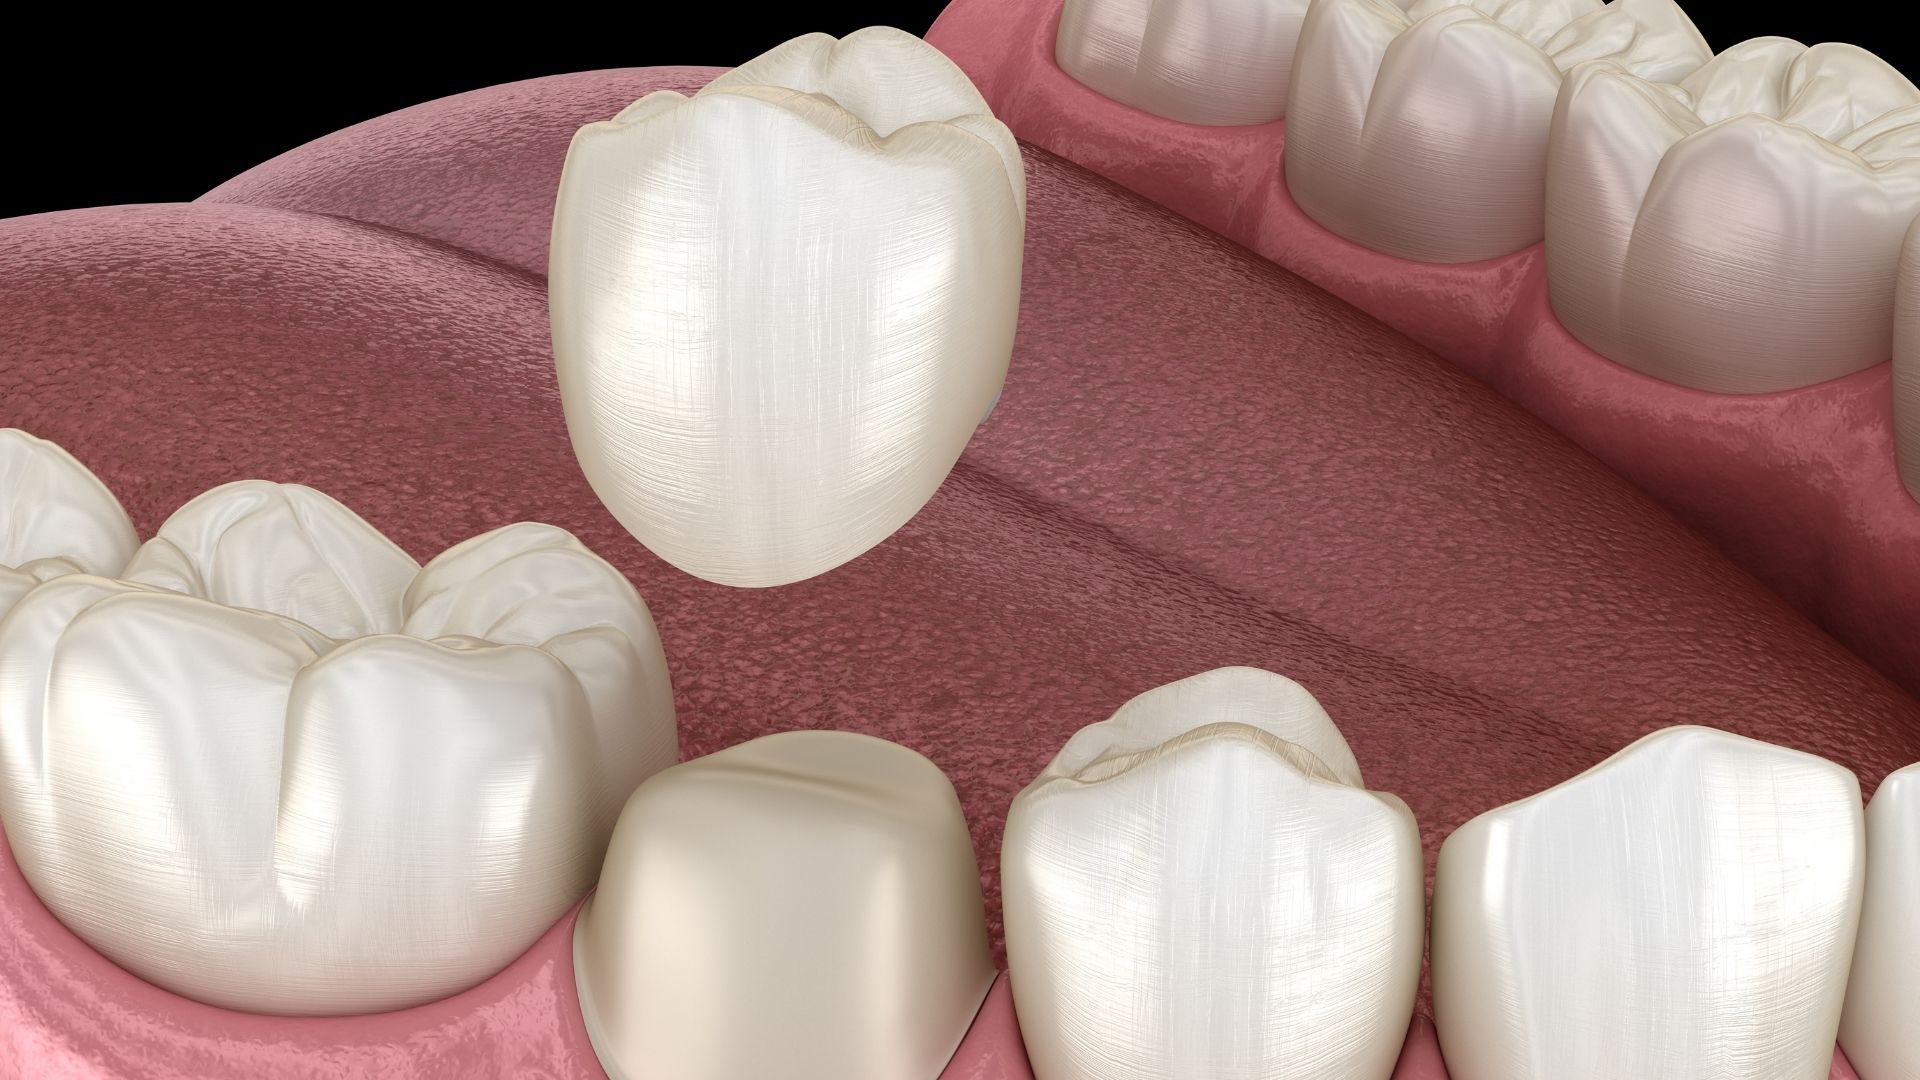 Dental Crowns and Bridges- Dentistry On Main (1920 × 1080 px)